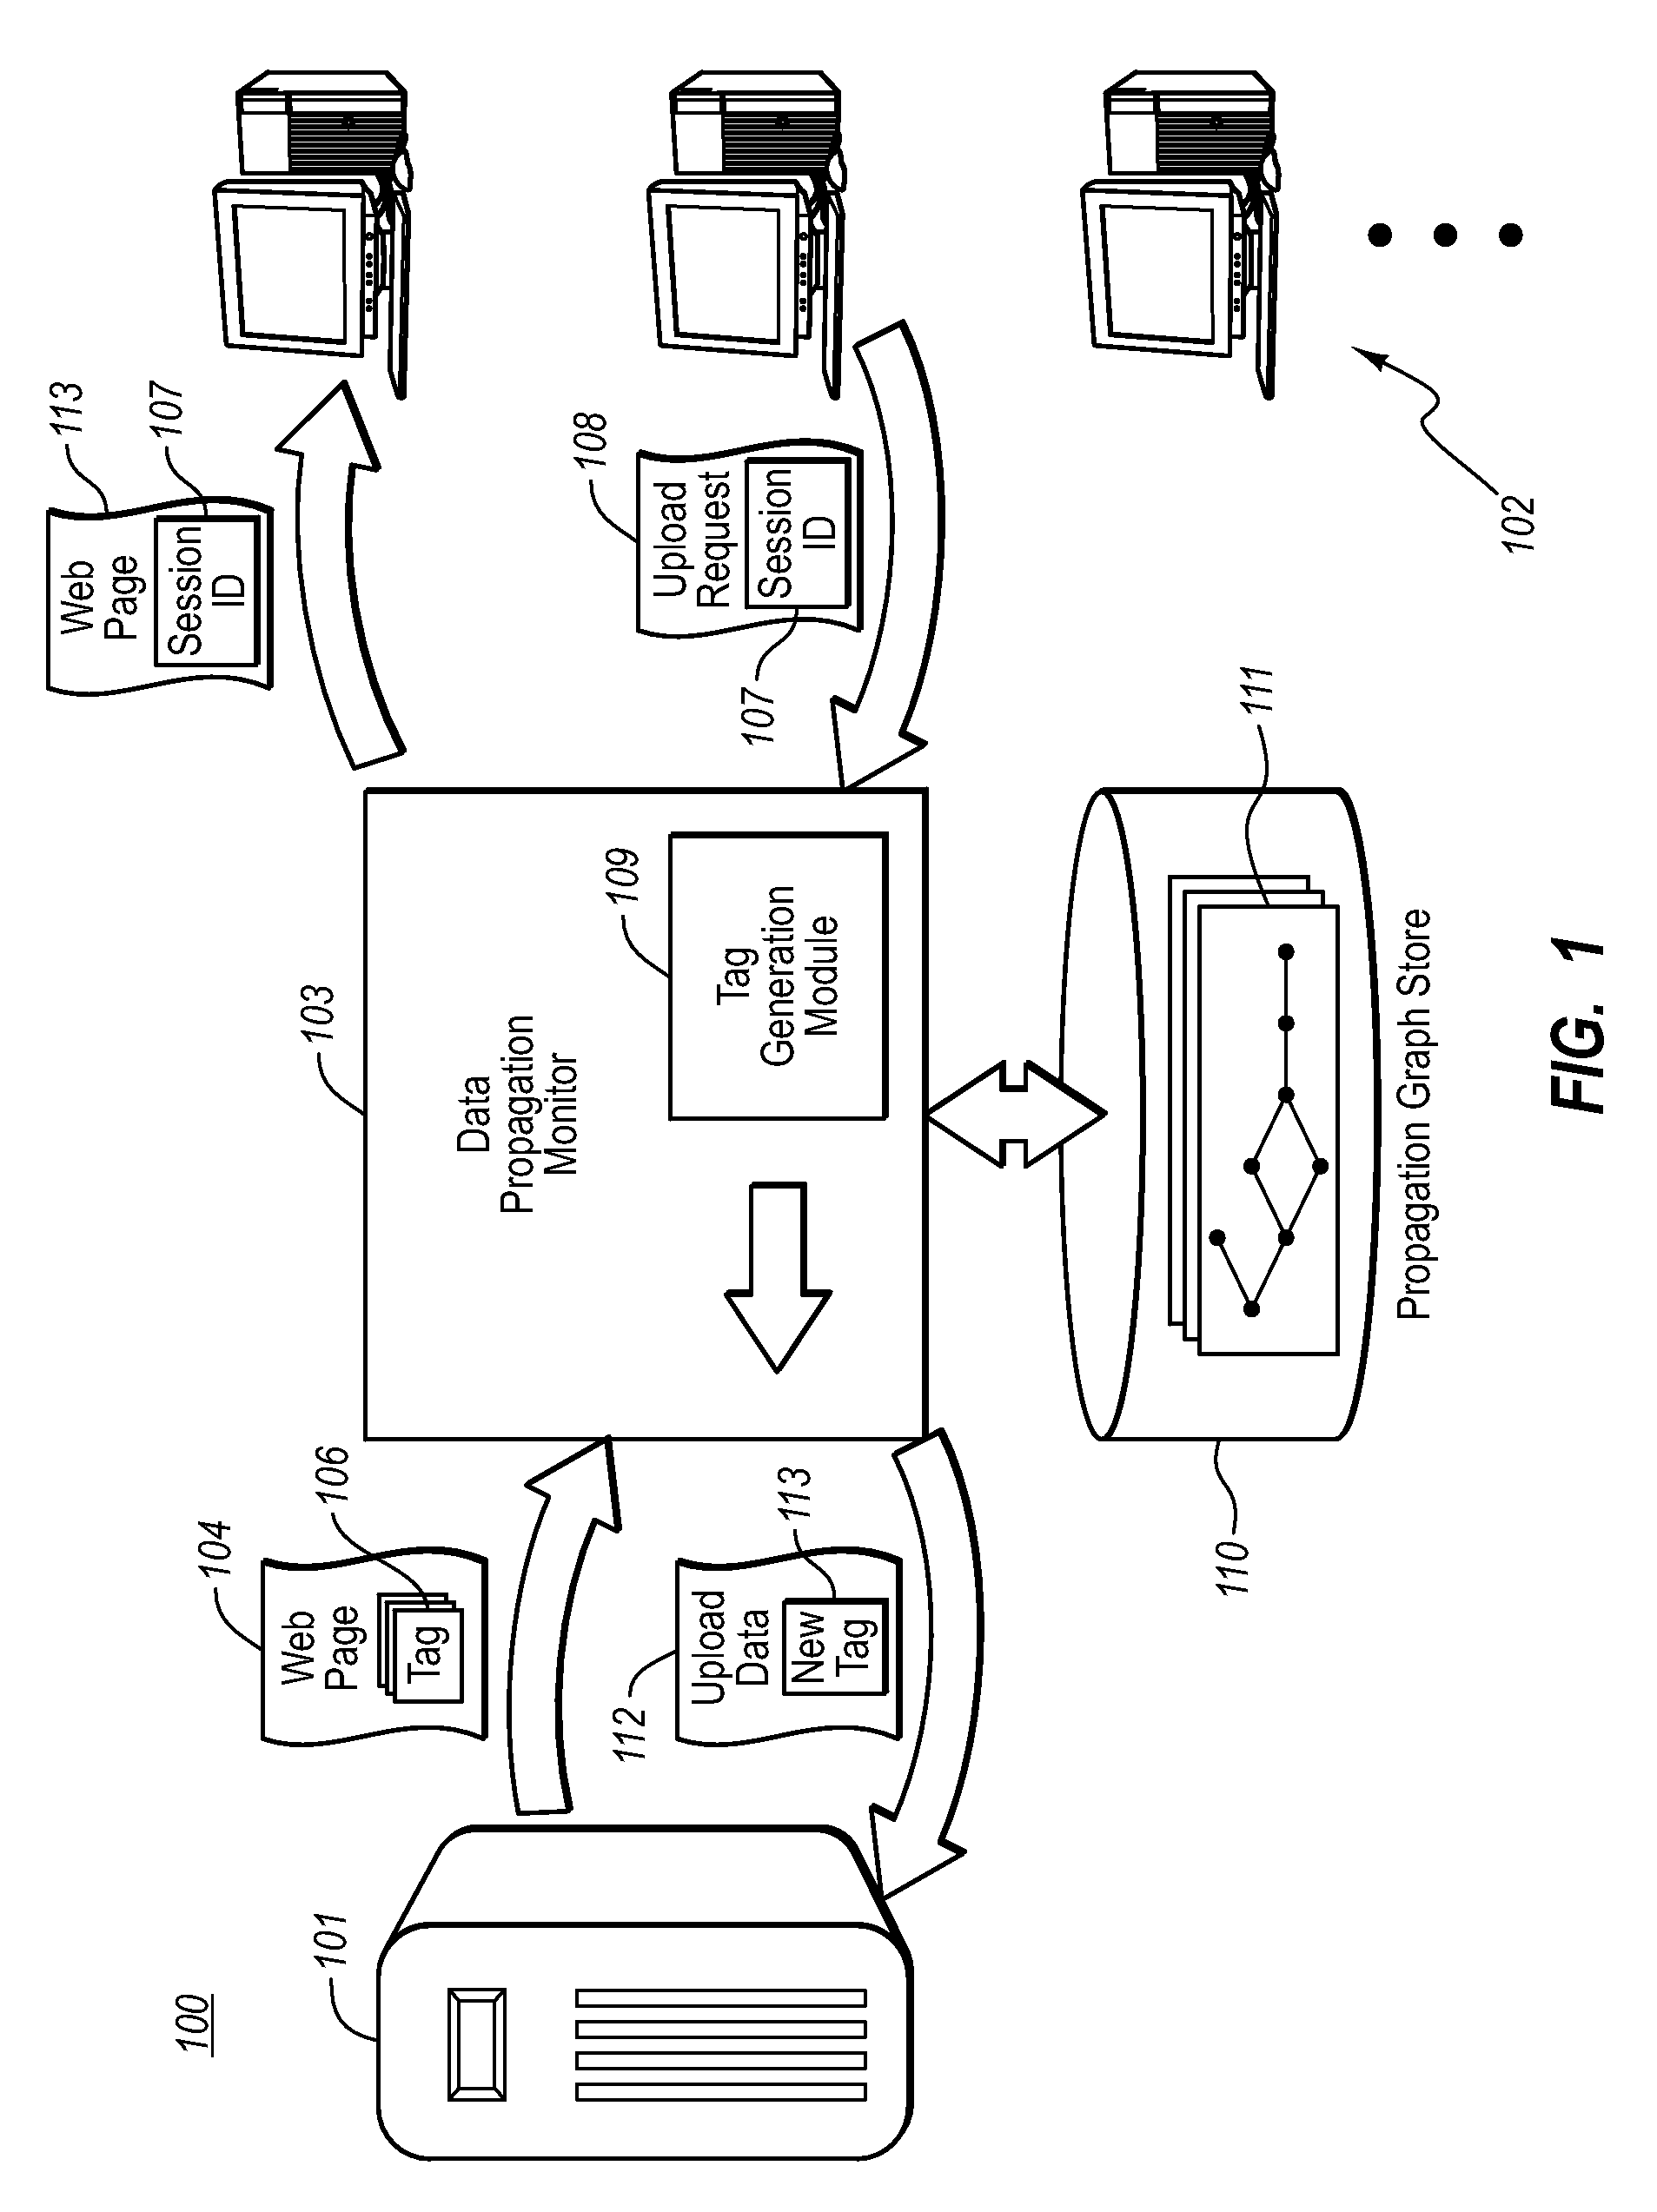 Detecting data propagation in a distributed system